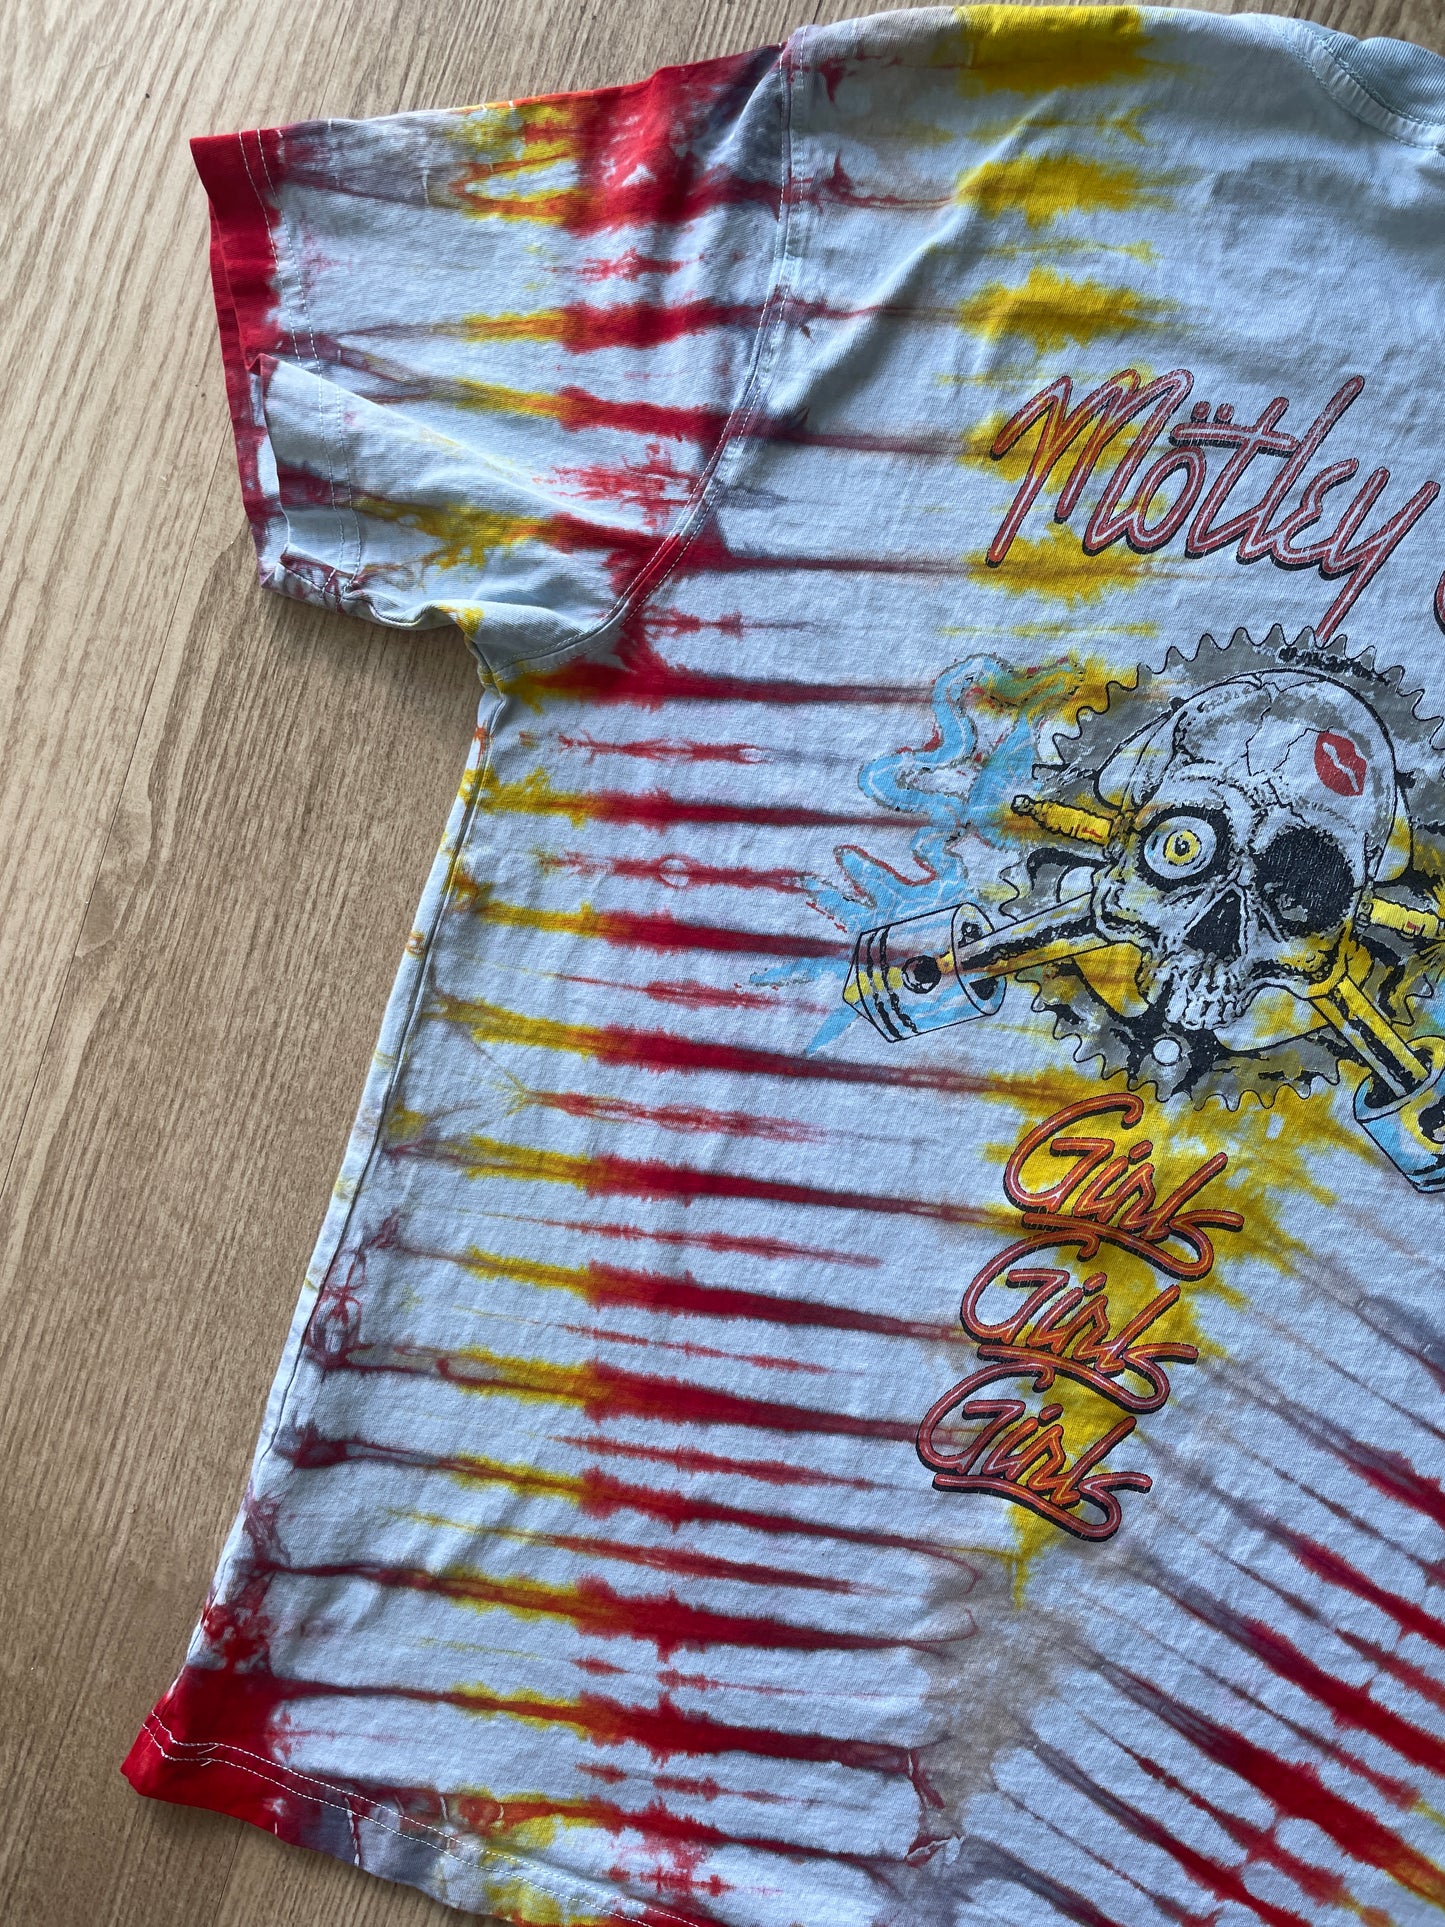 LARGE Men’s Motley Crue Girls! Girls! Girls! Handmade Tie Dye T-Shirt | One-Of-a-Kind Yellow and Red Short Sleeve